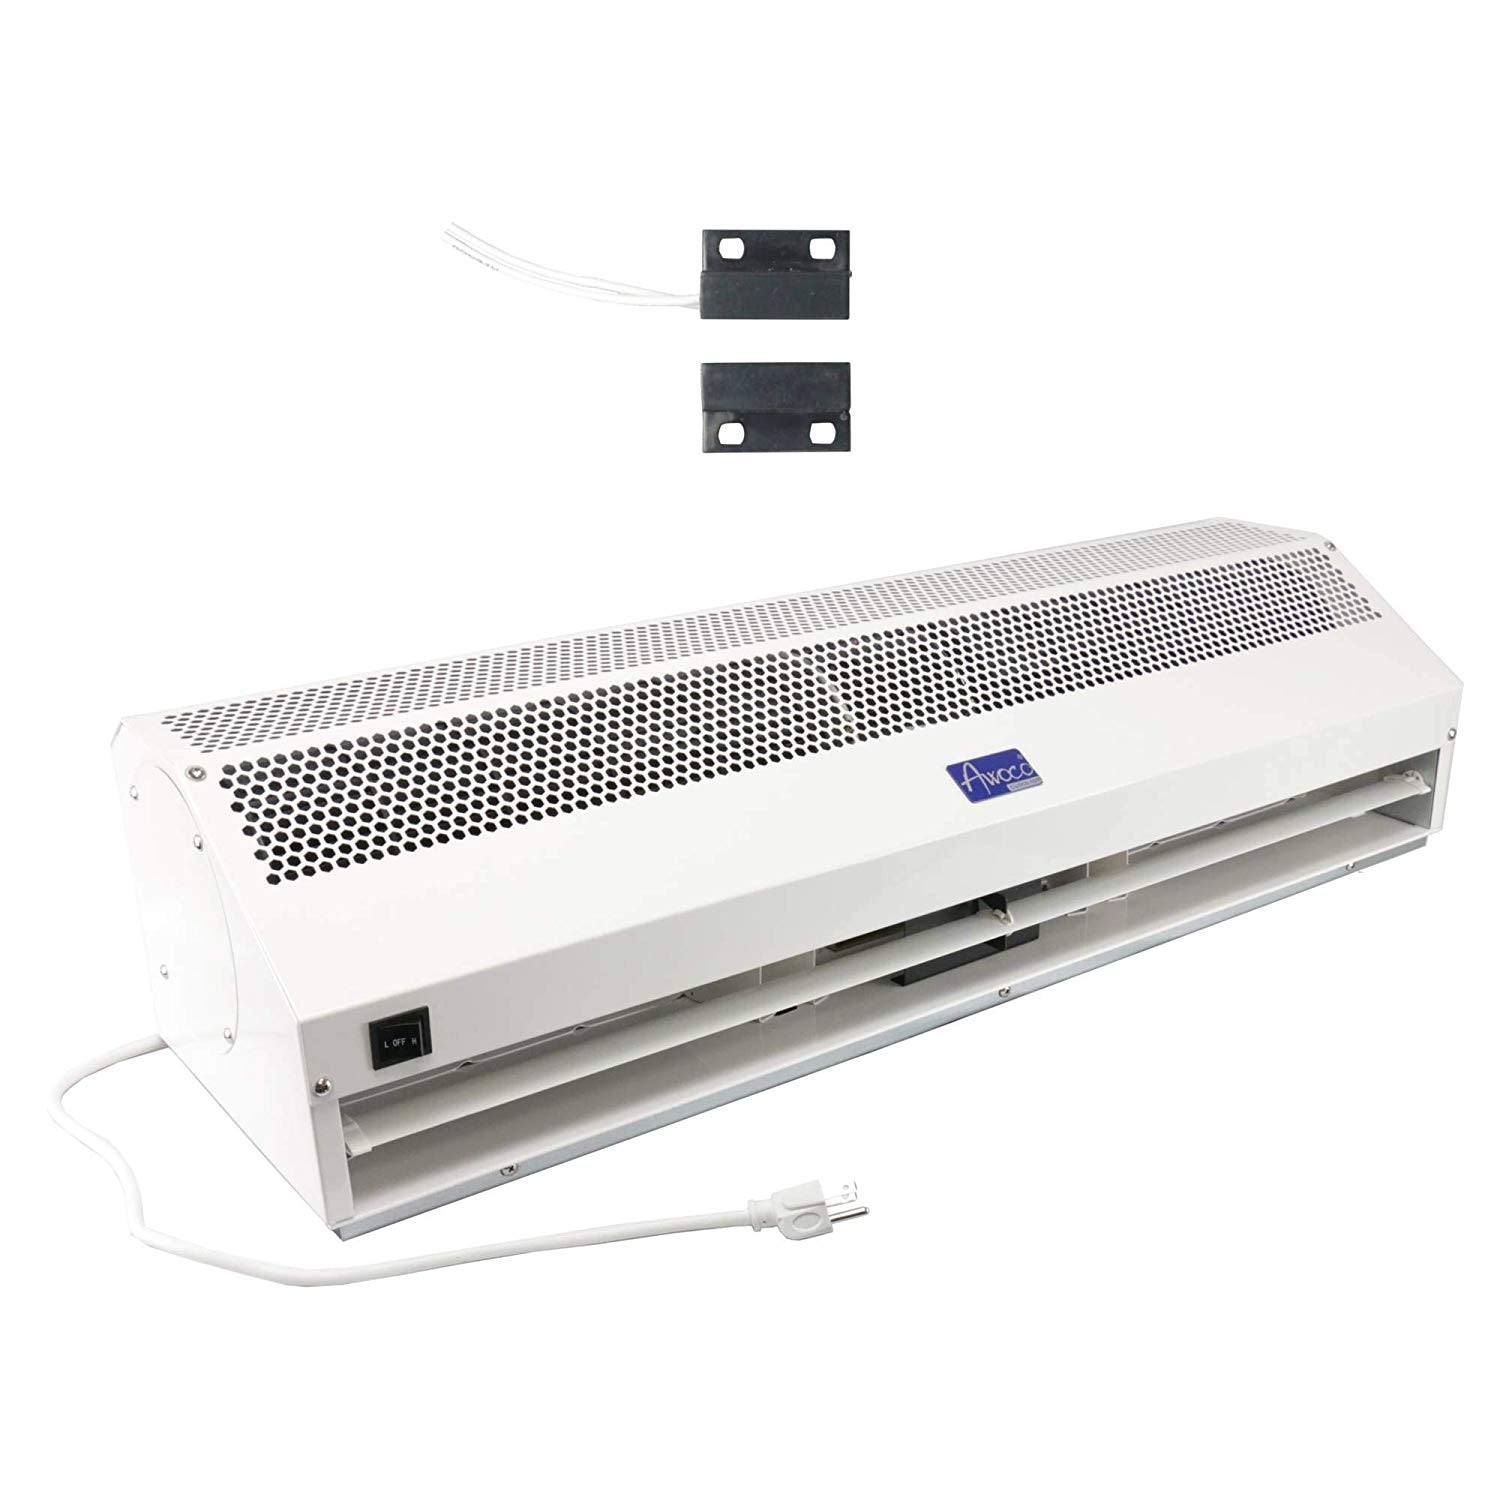 [Refurbished] Awoco FM1518-M 72” Super Power 2 Speeds Indoor Air Curtain, UL Certified, 120V Unheated With An Easy-Install Magnetic Switch